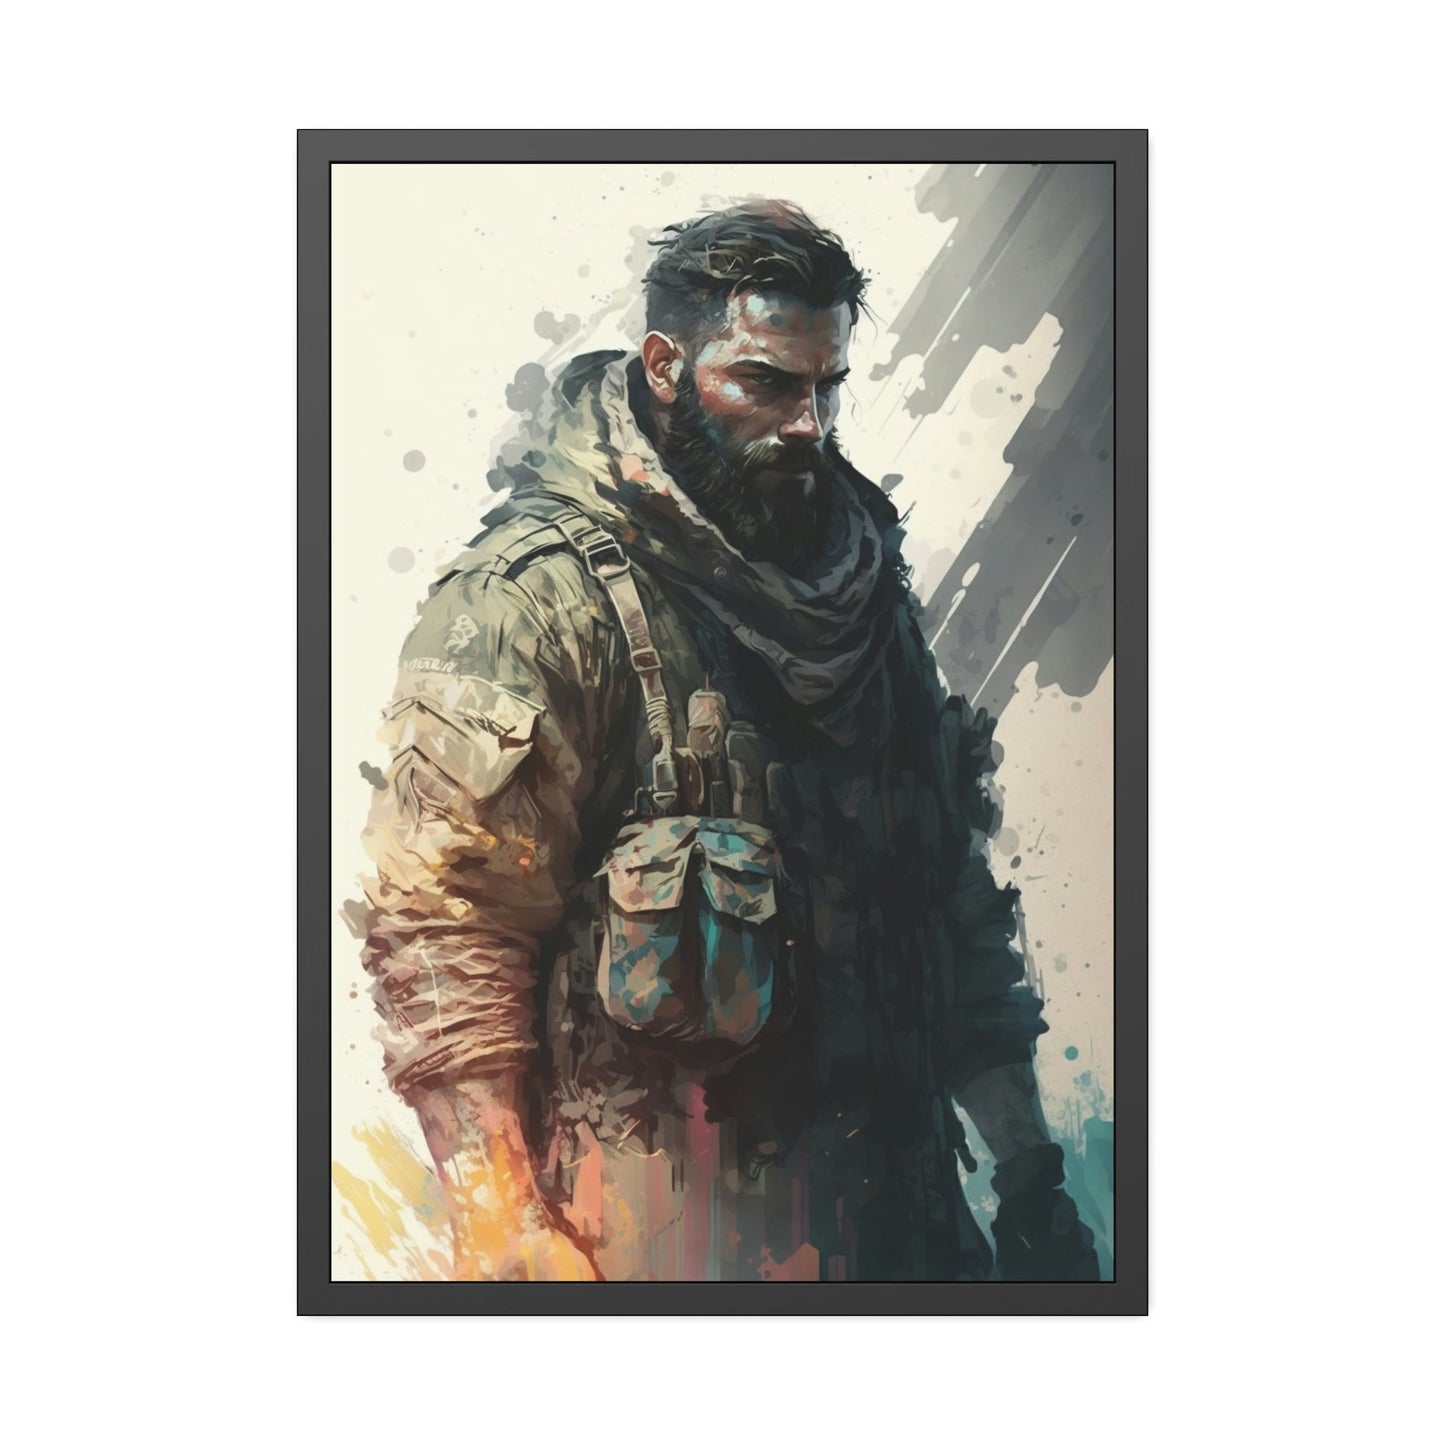 Military Strategy: Call of Duty Art on Framed Canvas and Posters